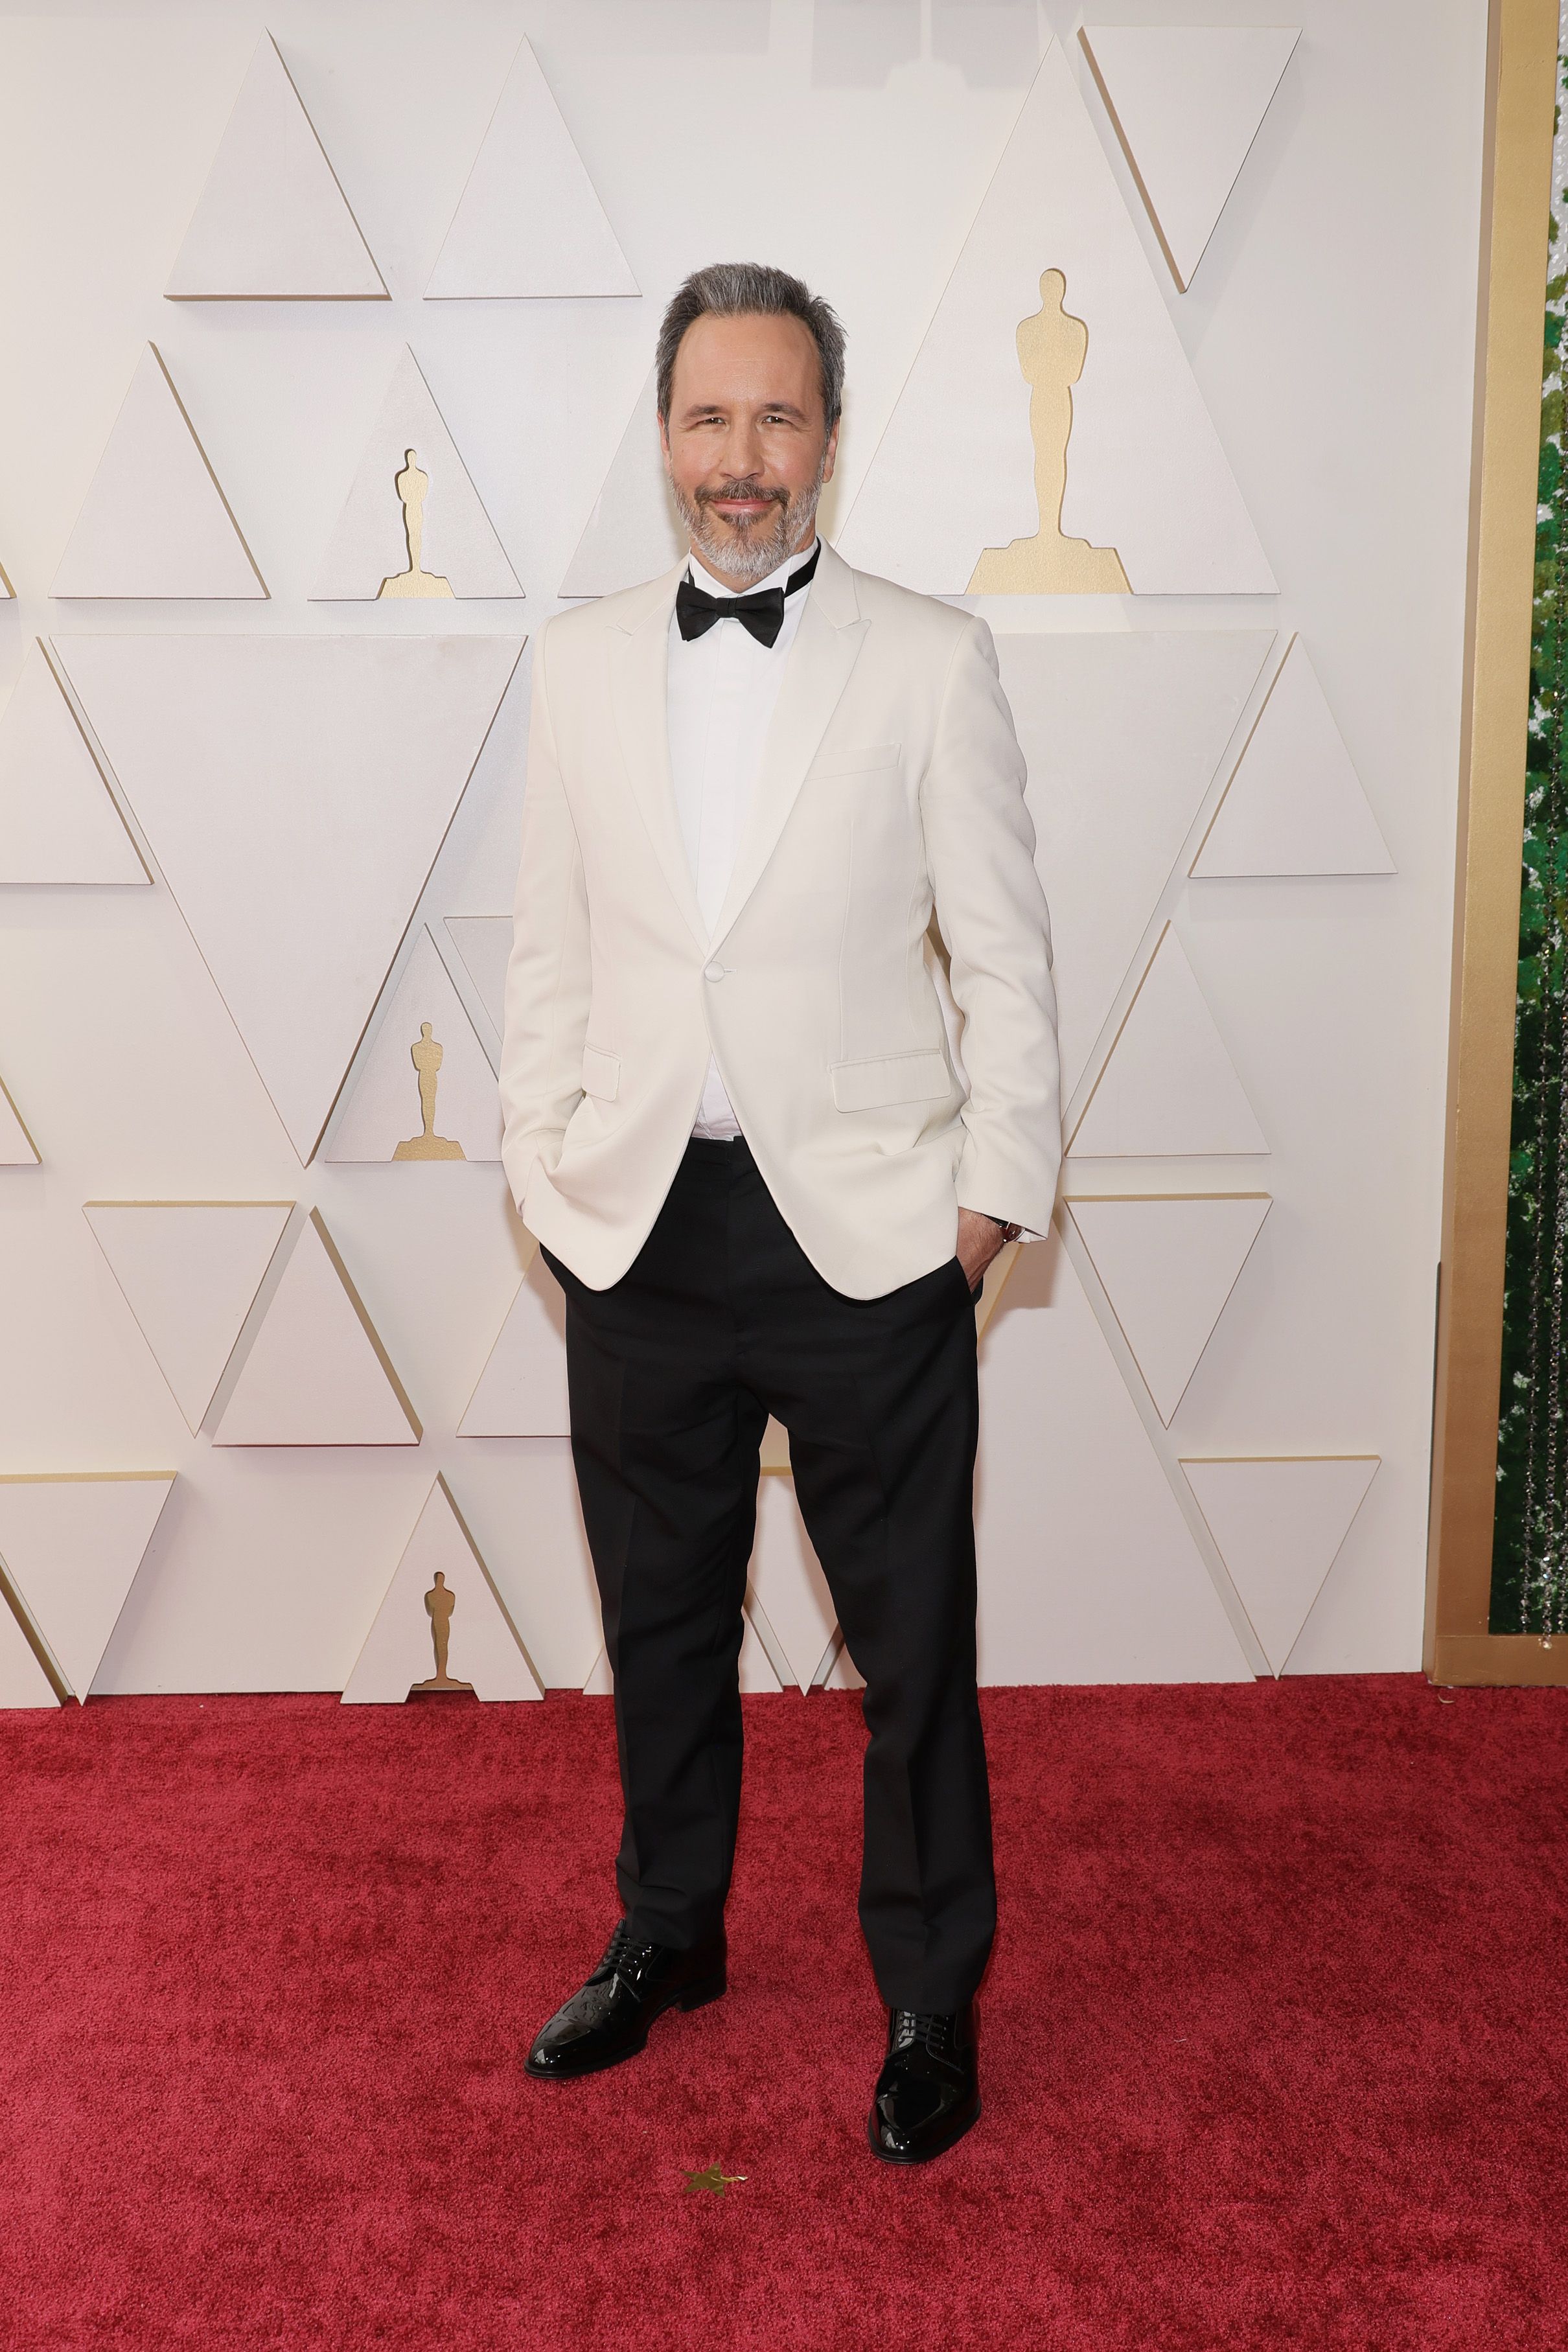 The 10 Best-Dressed Men at the Oscars | GQ